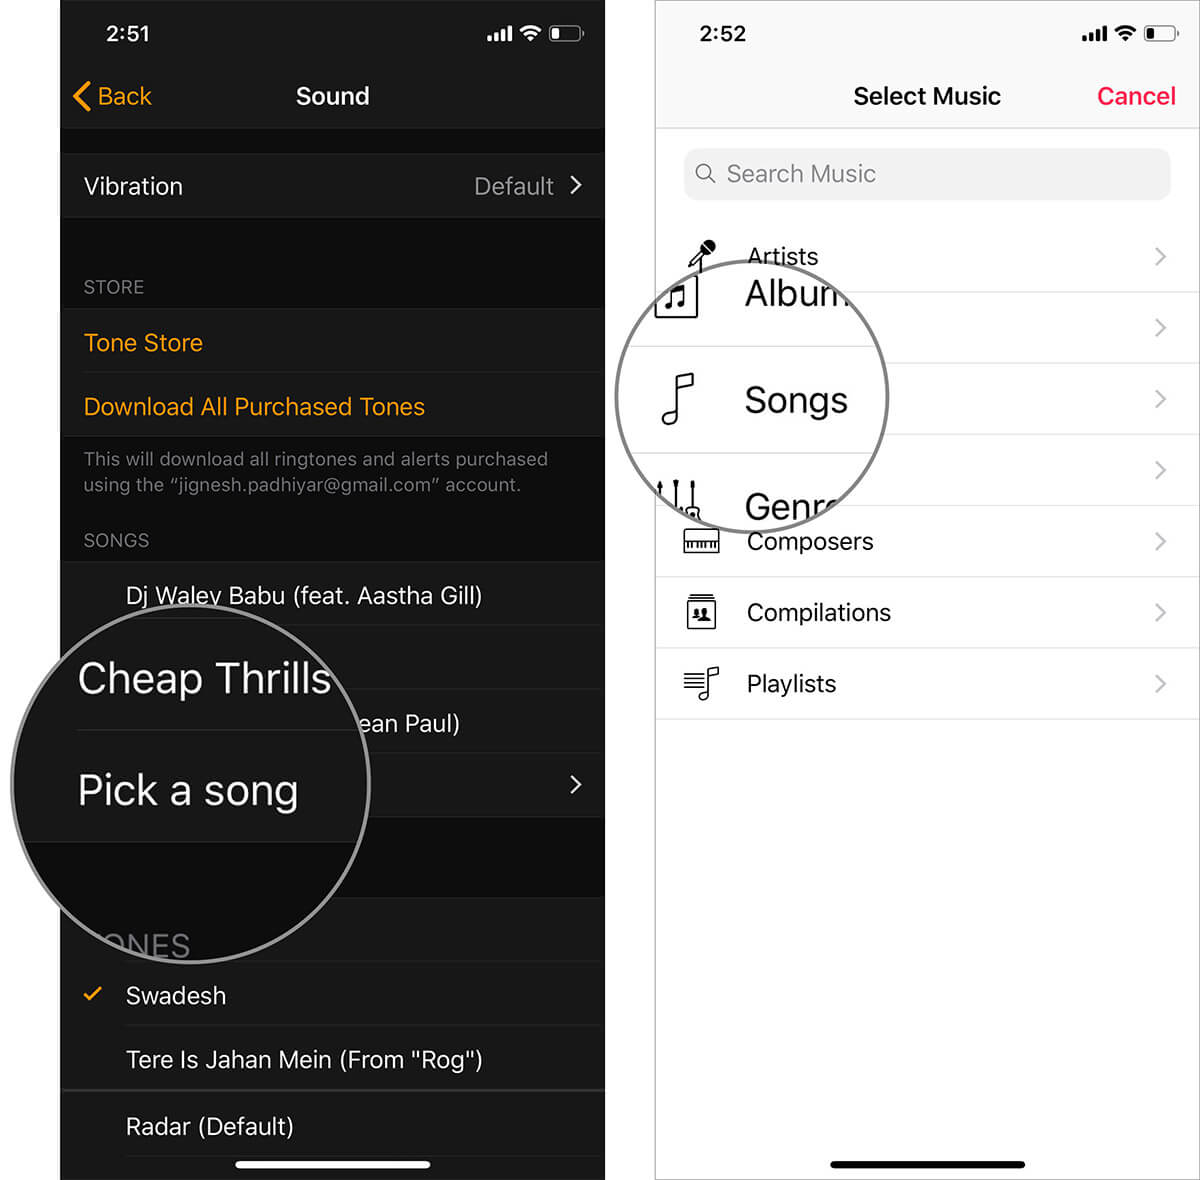 Tap on Pick a song and hit Songs in iOS Clock app